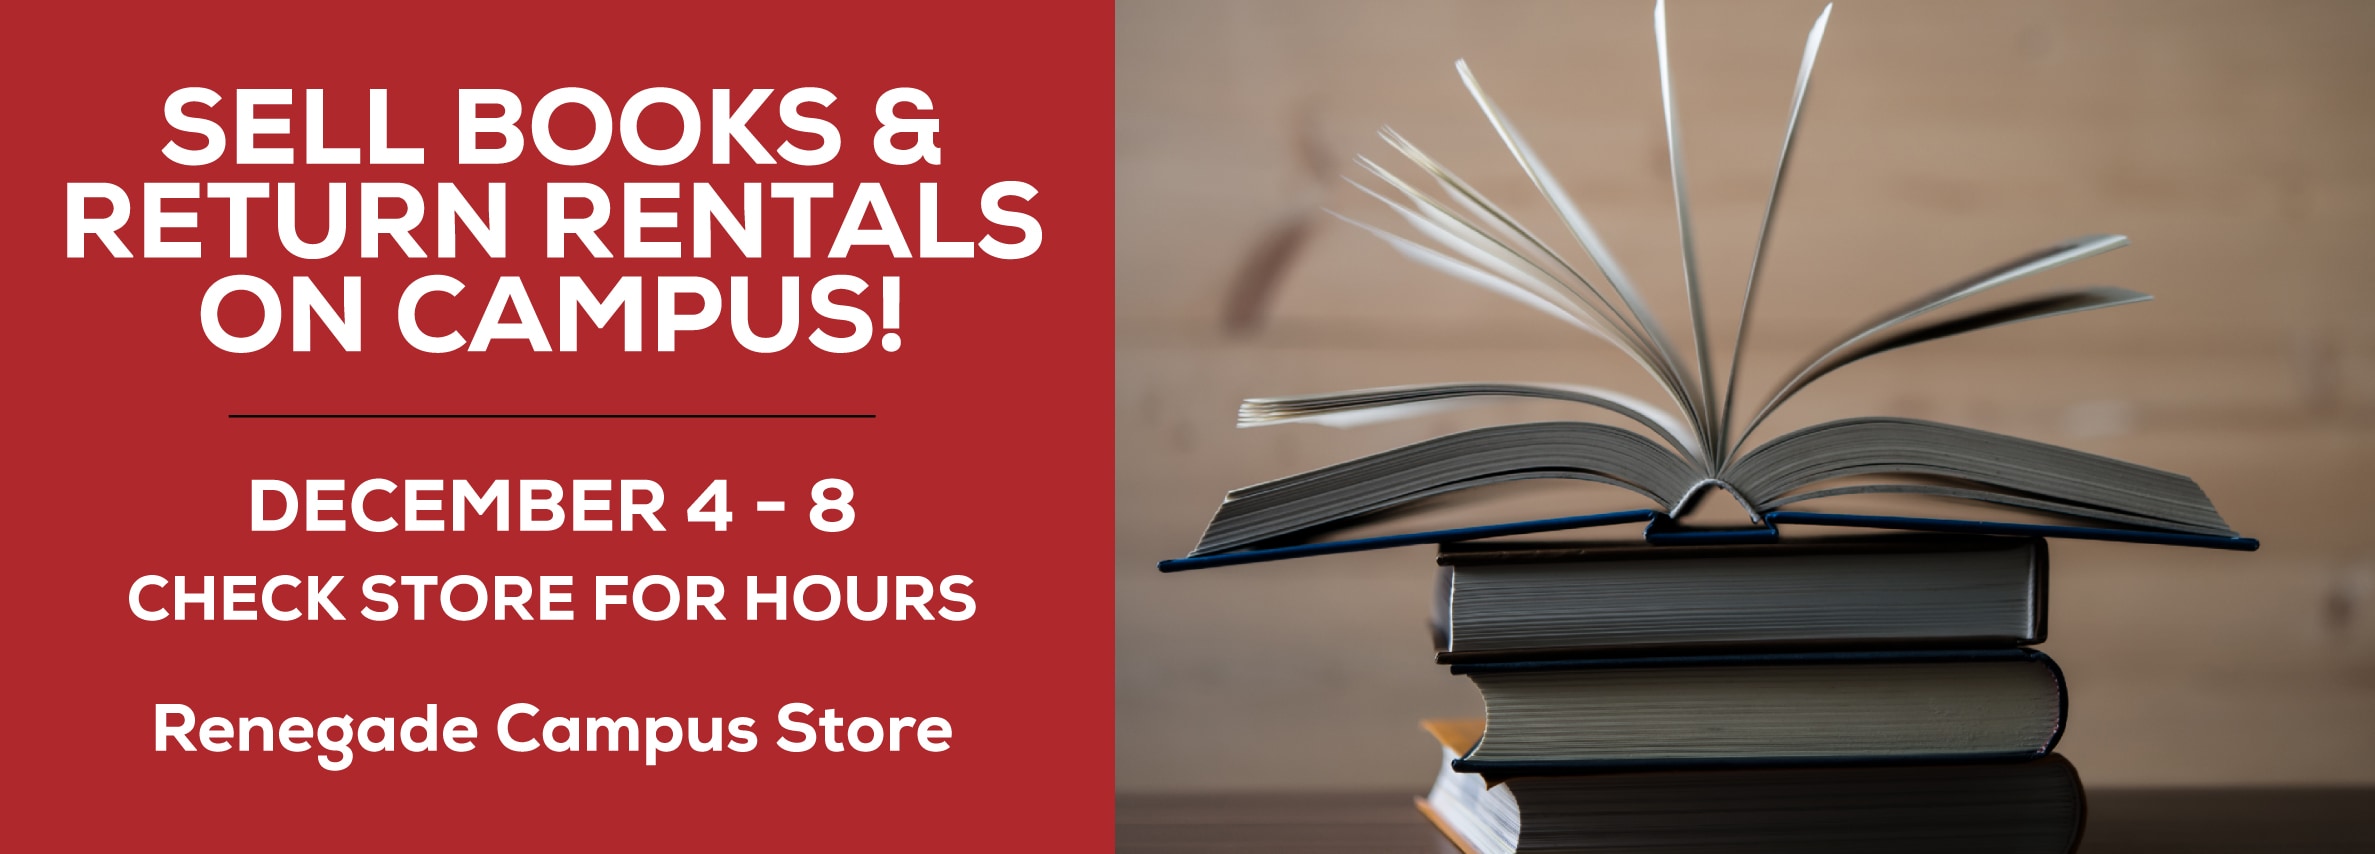 Sell Books & Return Rentals On Campus! May 6 - 10. 10am - 5pm. Renegade Campus store